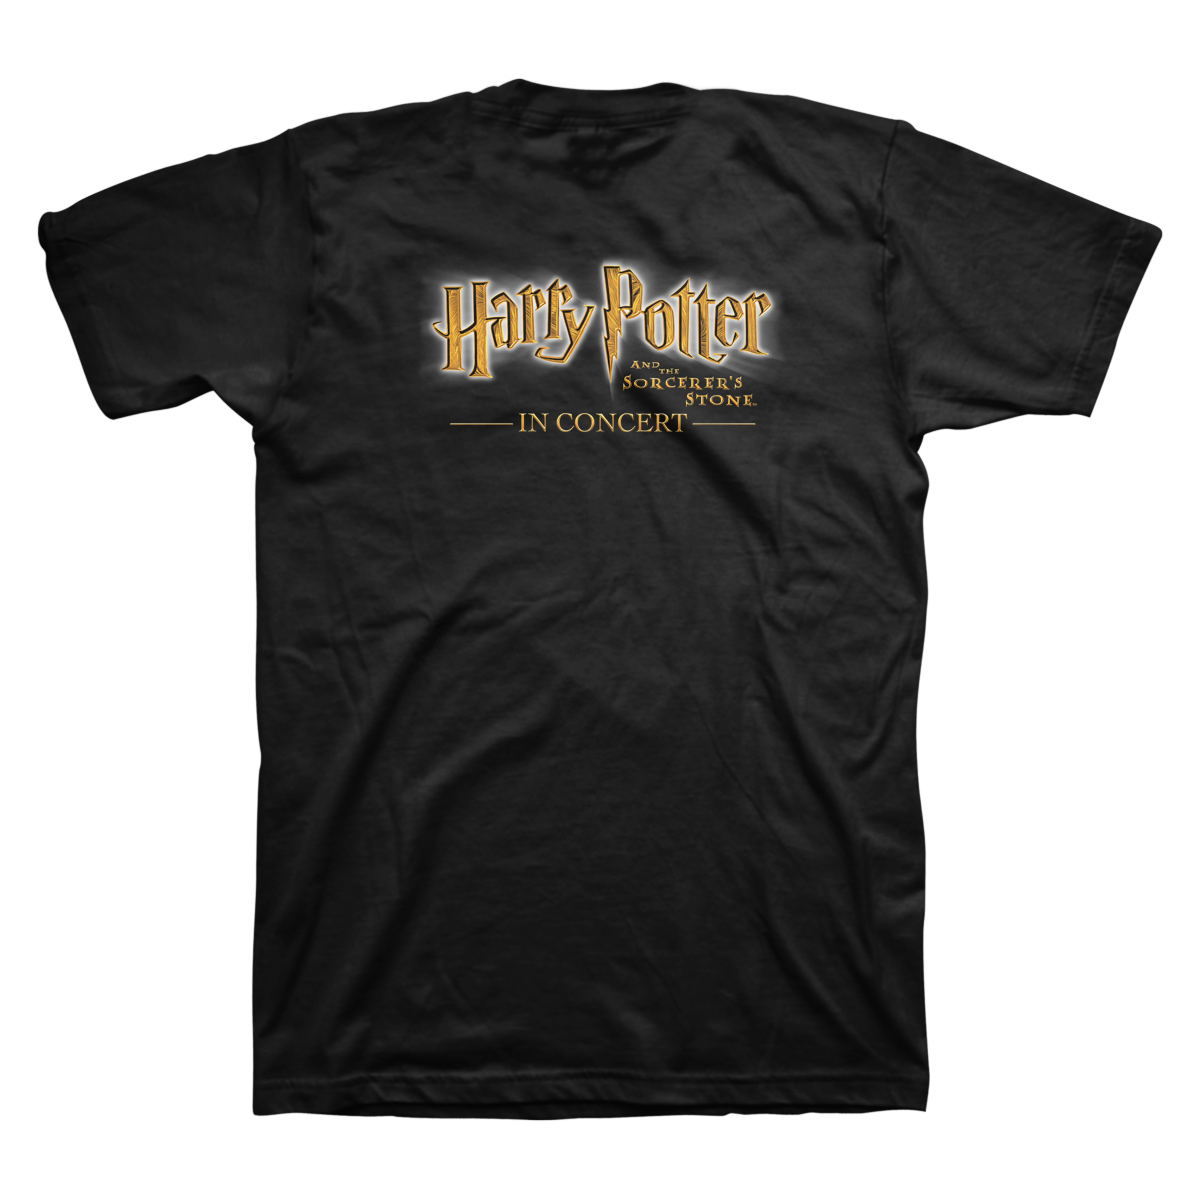 Harry Potter and the Sorcerer's Stone™ in Concert T-Shirt